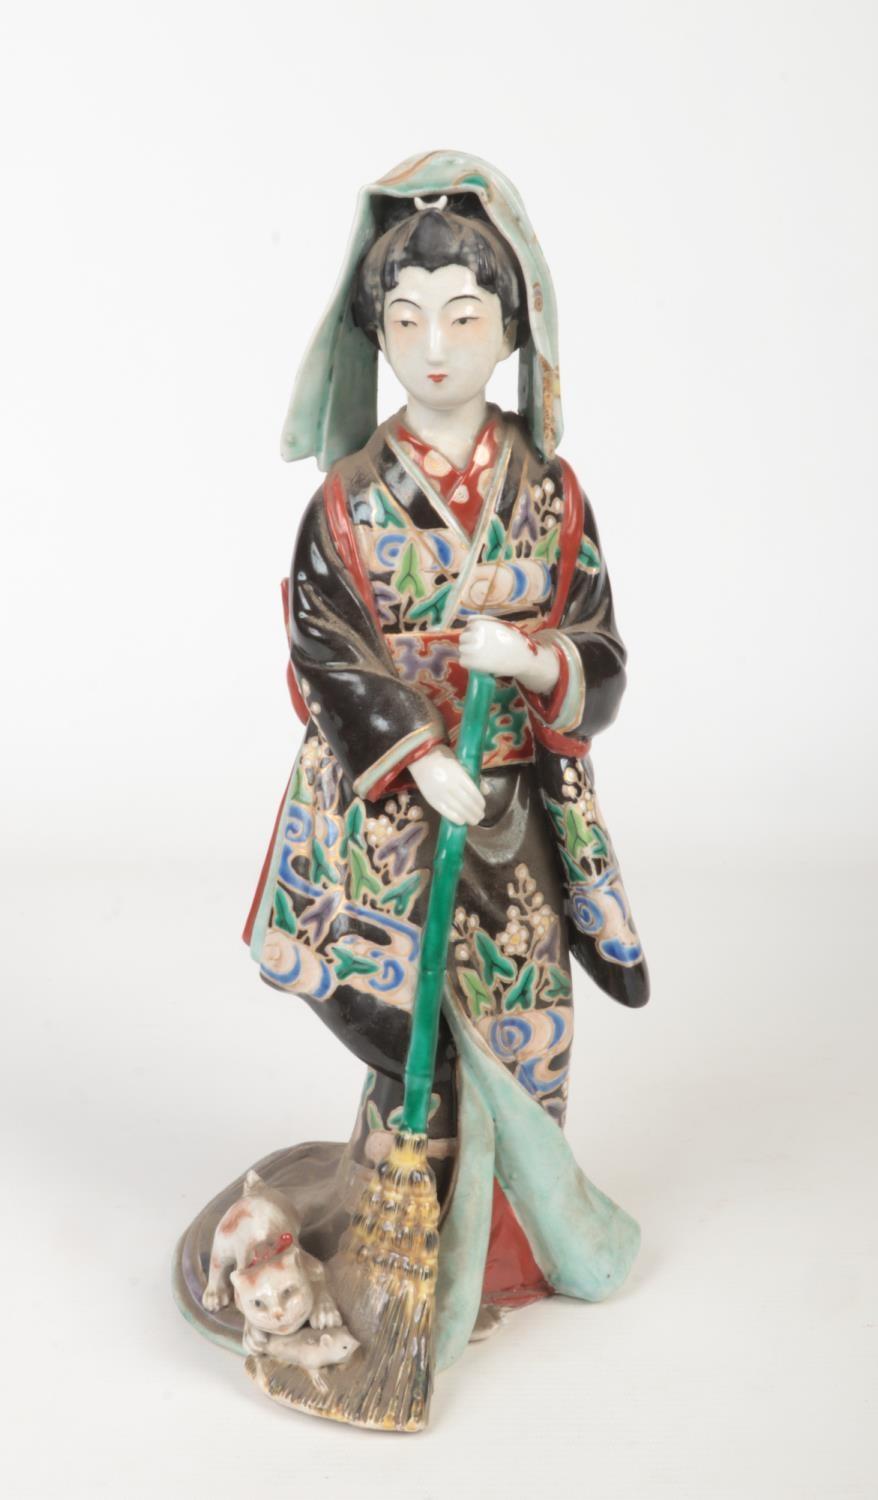 A Japanese Meiji period Kutani figure. Decorated in coloured glazes and formed as a maiden with a